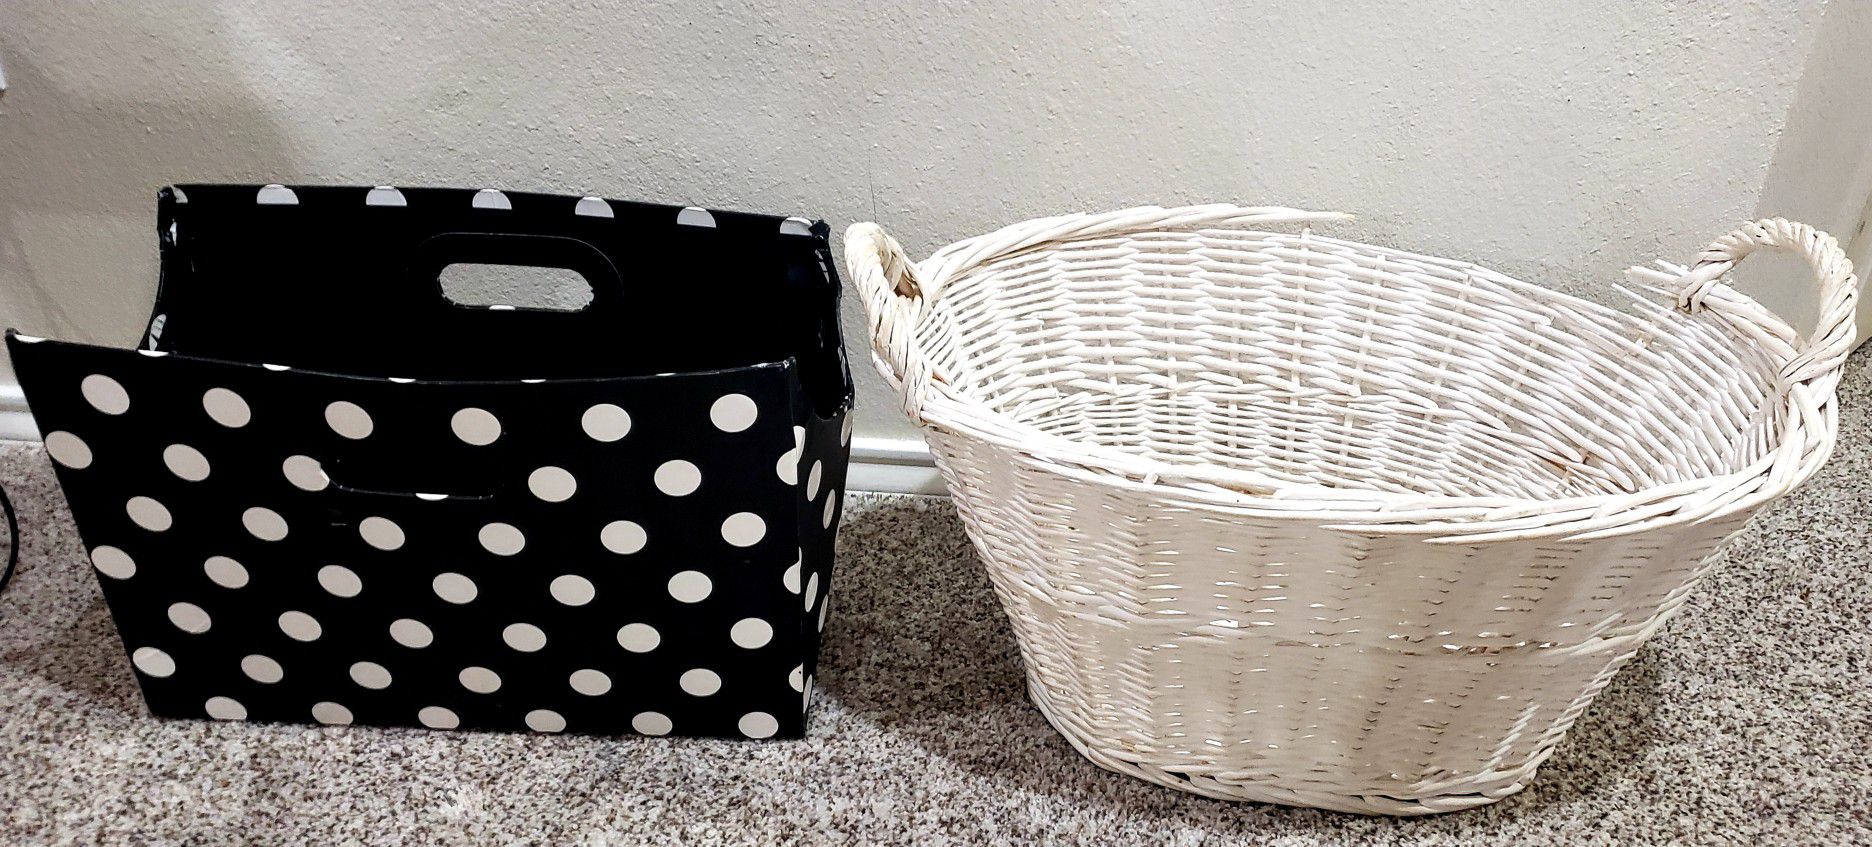 Storage Containers well loved $10 for Both 